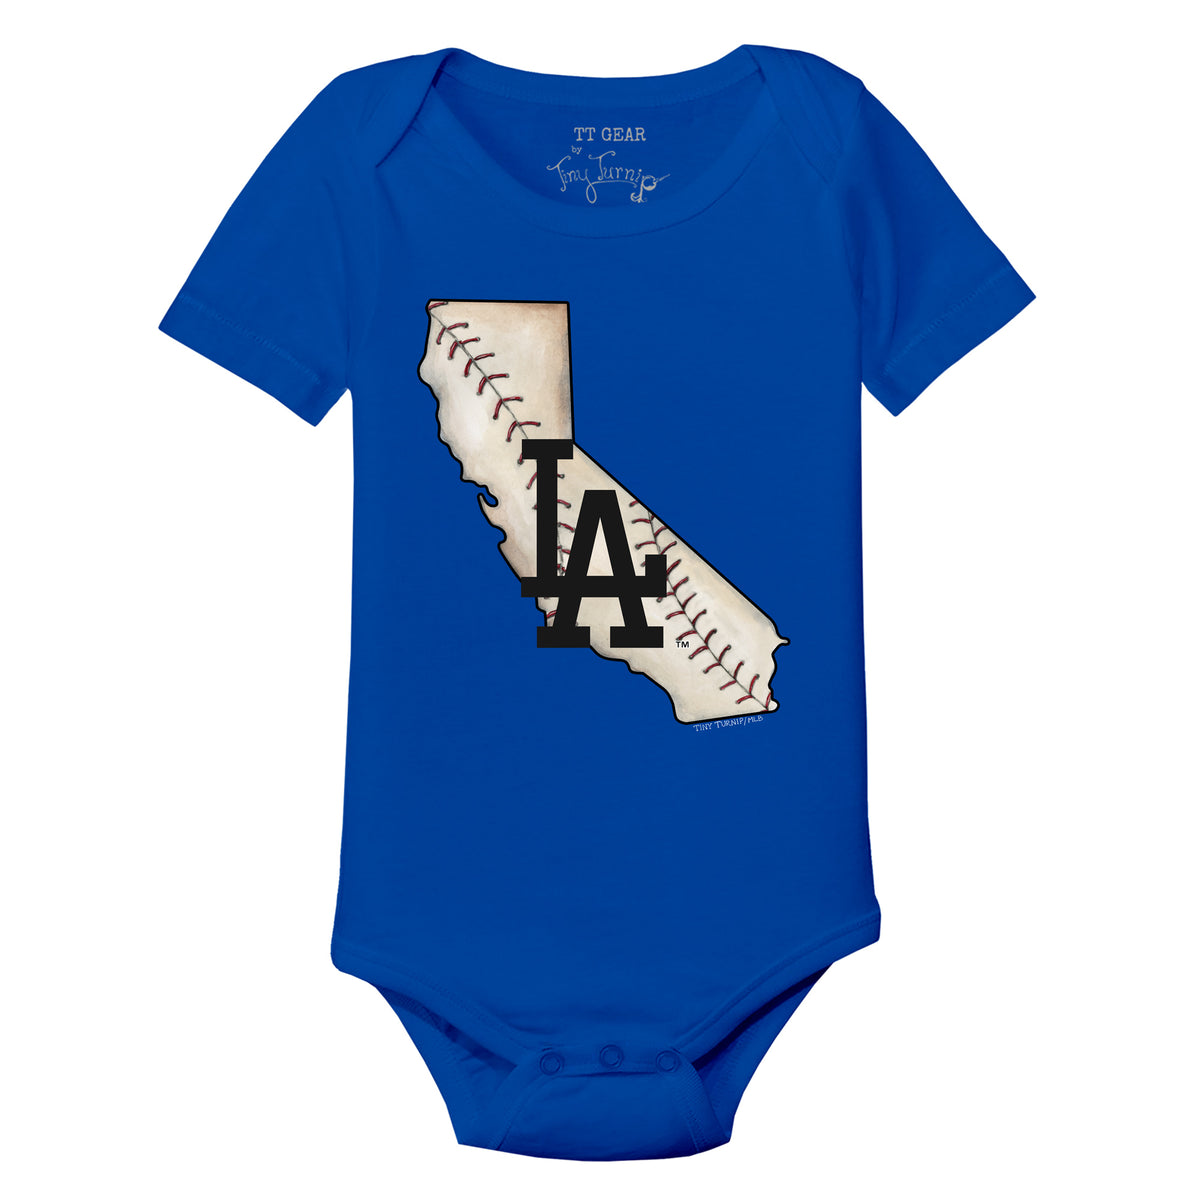 Los Angeles Dodgers Baby Apparel, Baby Dodgers Clothing